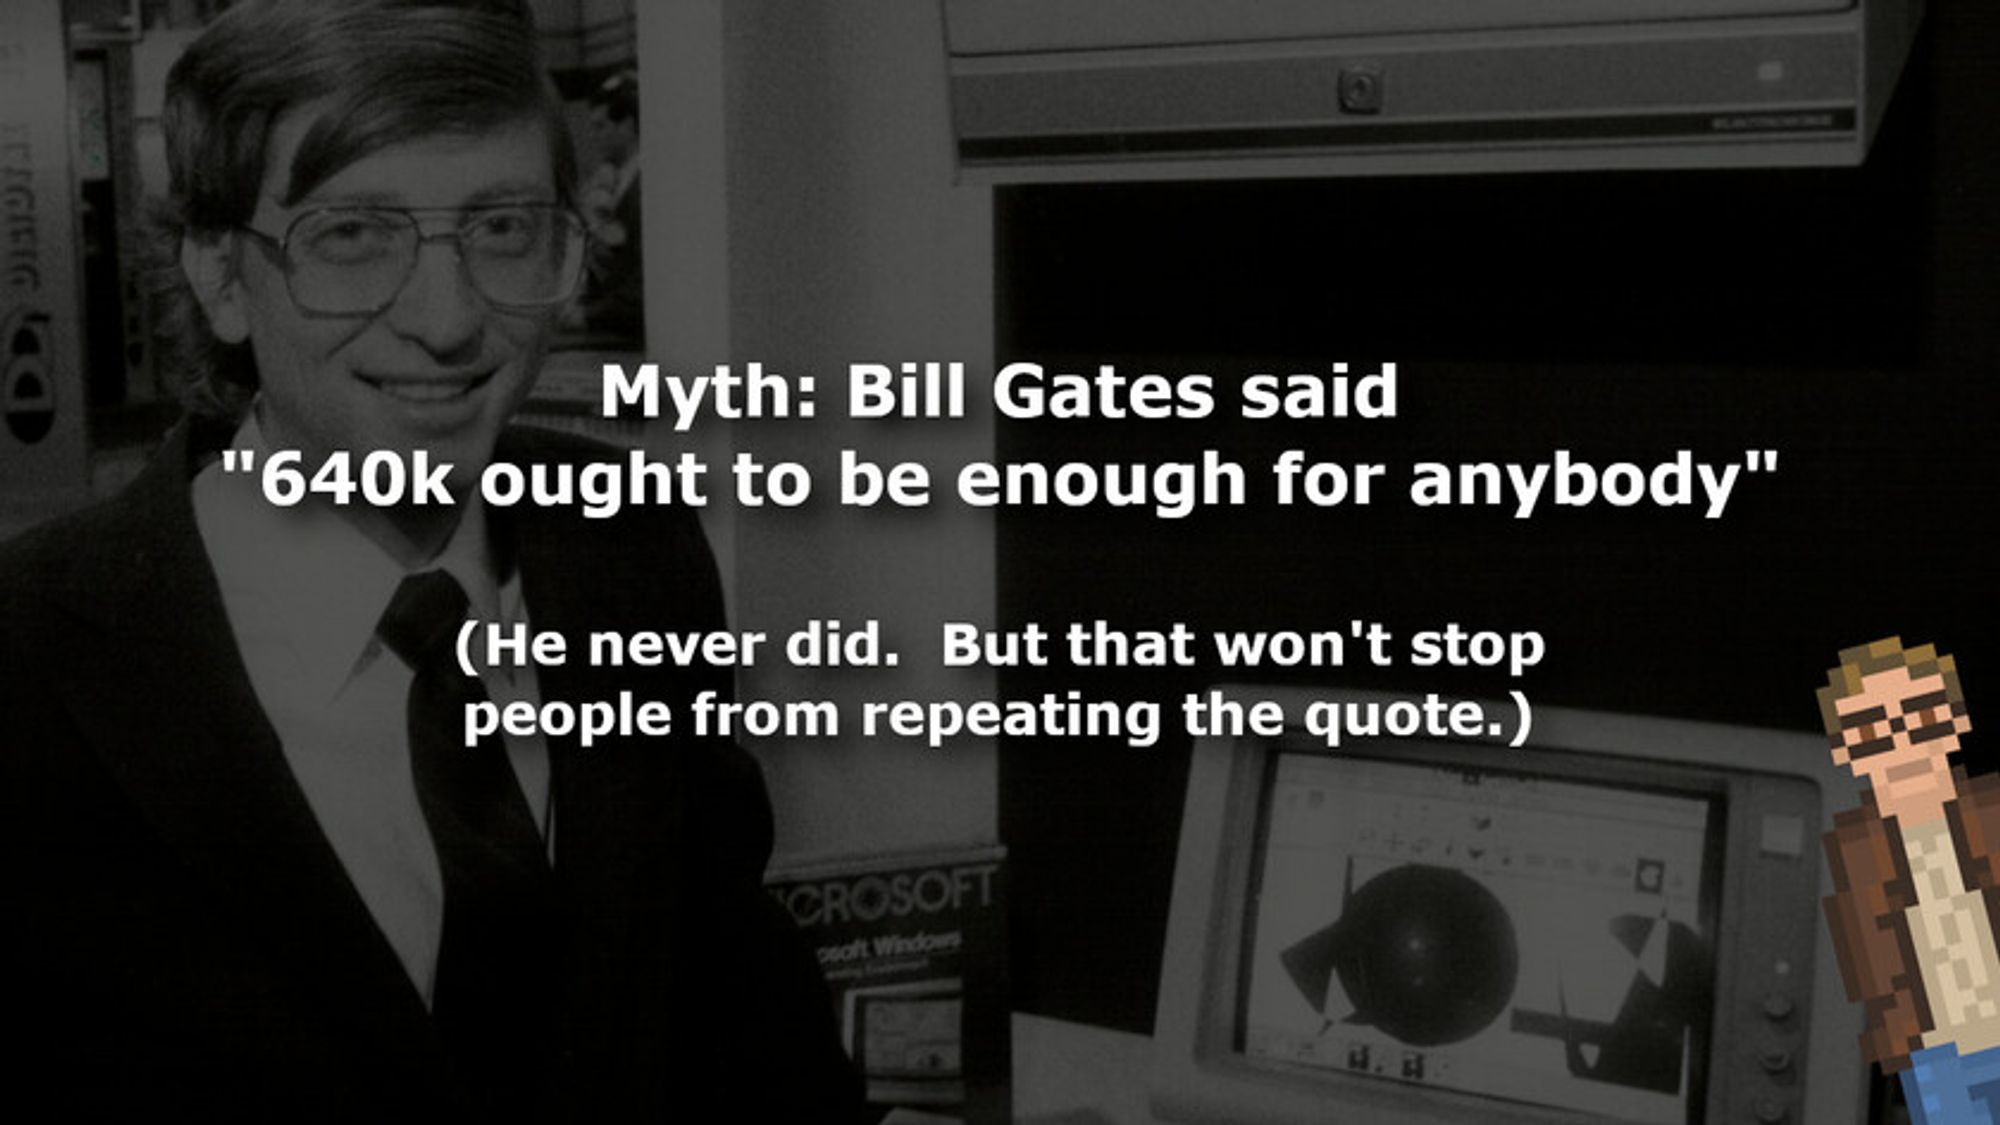 Myth: Bill Gates said '640k ought to be enough for anybody'